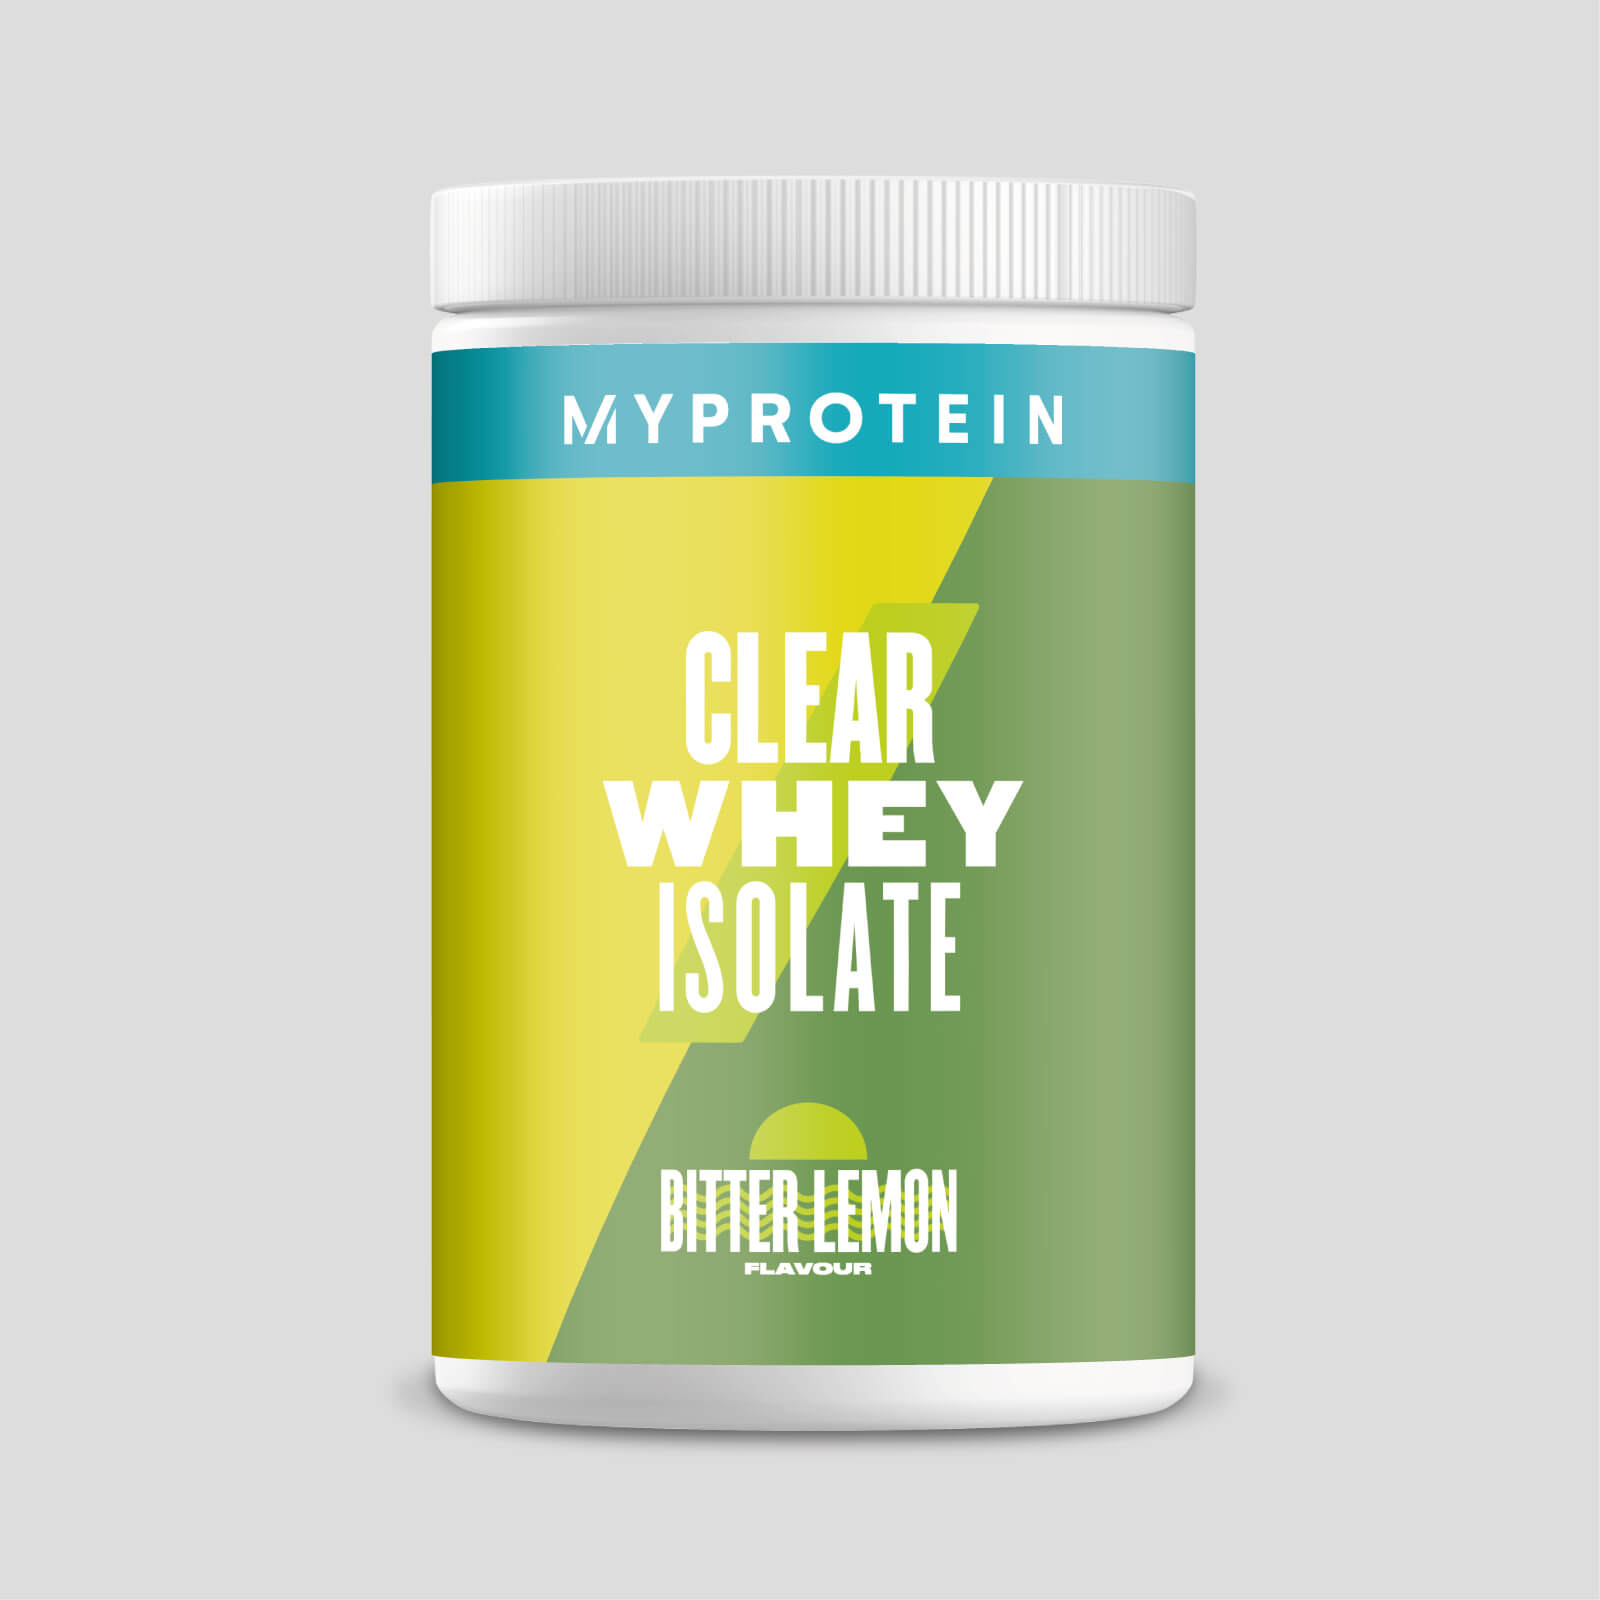 Myprotein Clear Whey Isolate - 35servings - Bitter Lemon